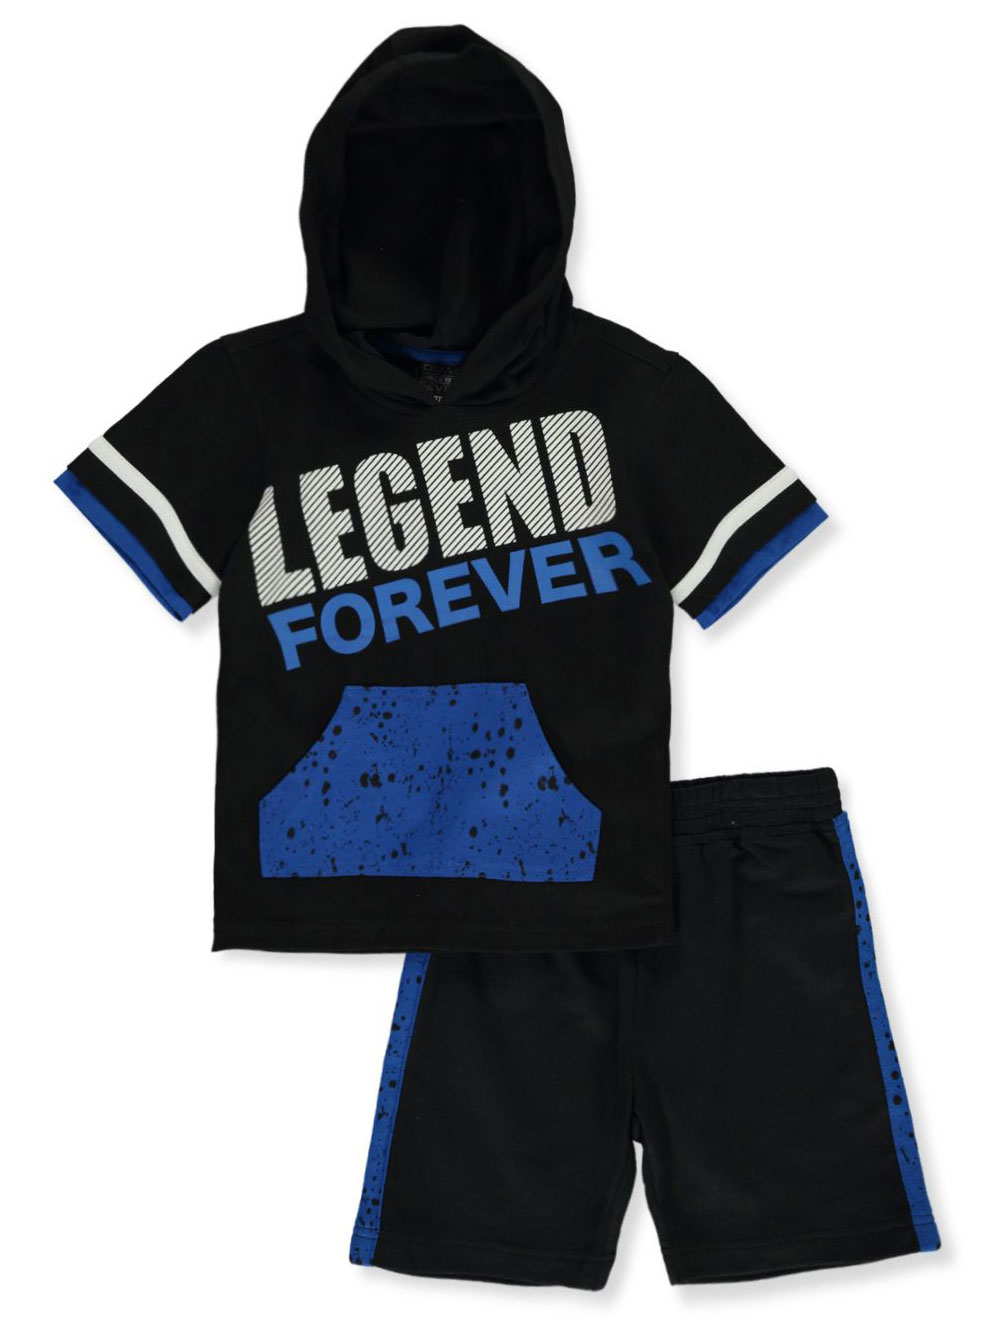 Size 12-14 Sets for Boys